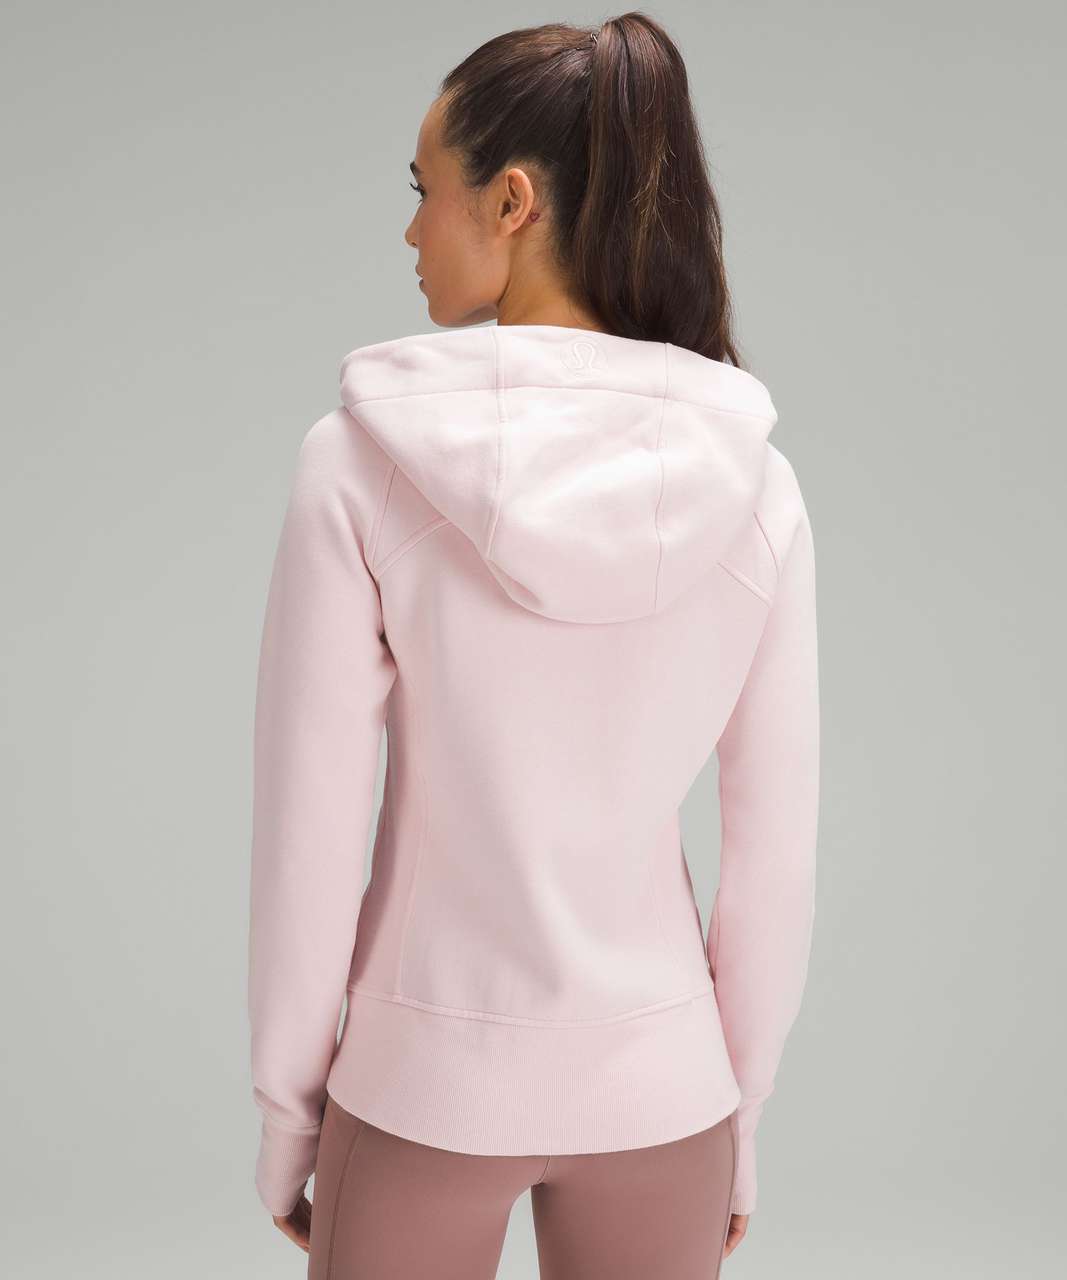 Lululemon Scuba Full-Zip Cropped Hoodie Size 8 LIP GLOSS Pink - SOLD OUT -  NWOT